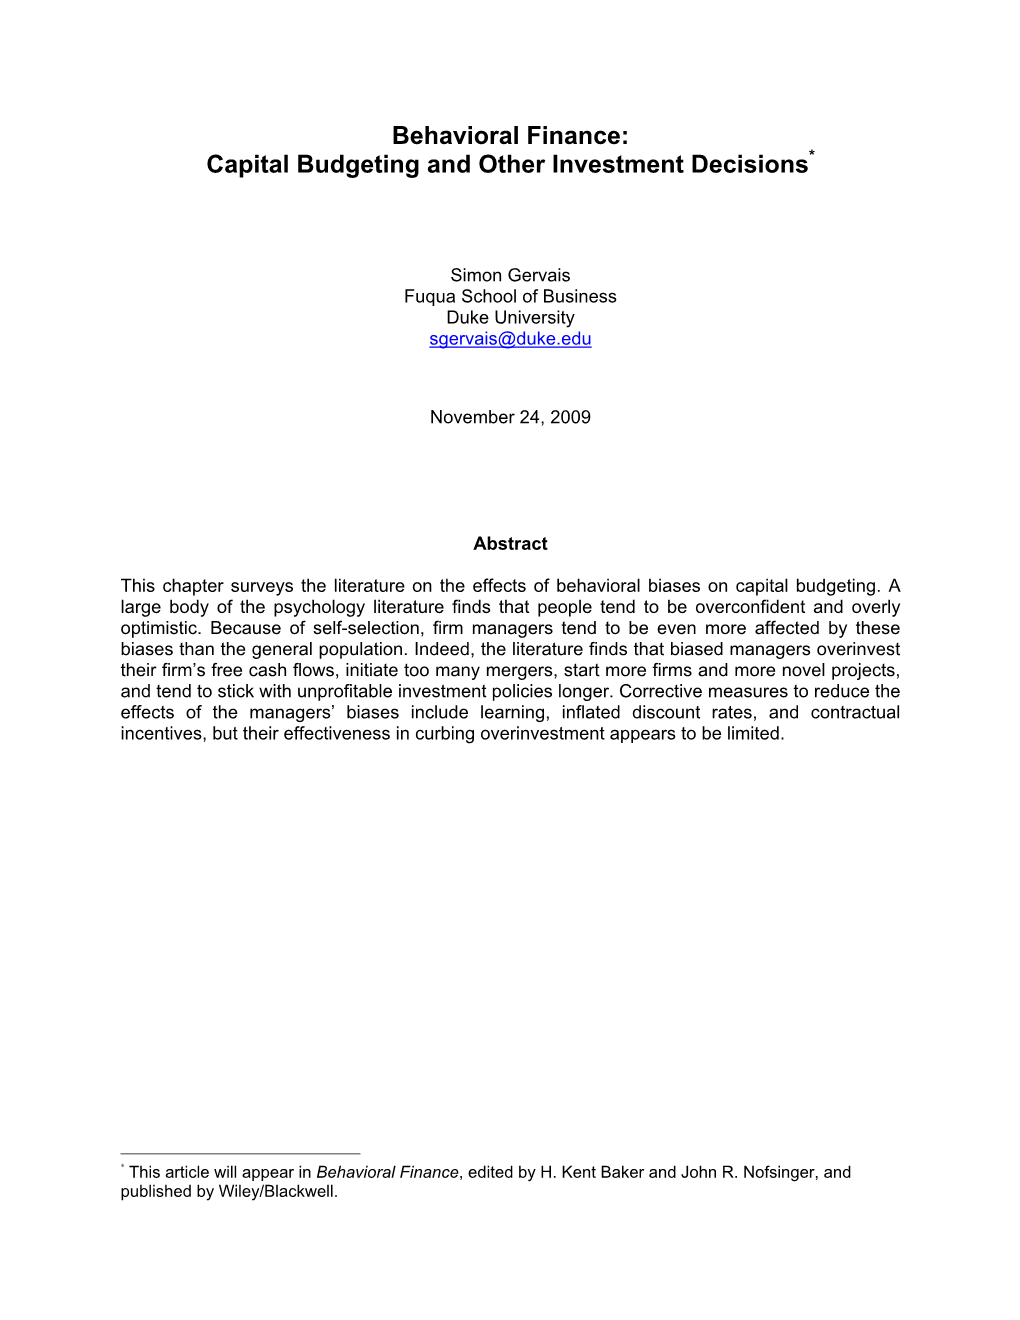 Capital Budgeting and Other Investment Decisions*